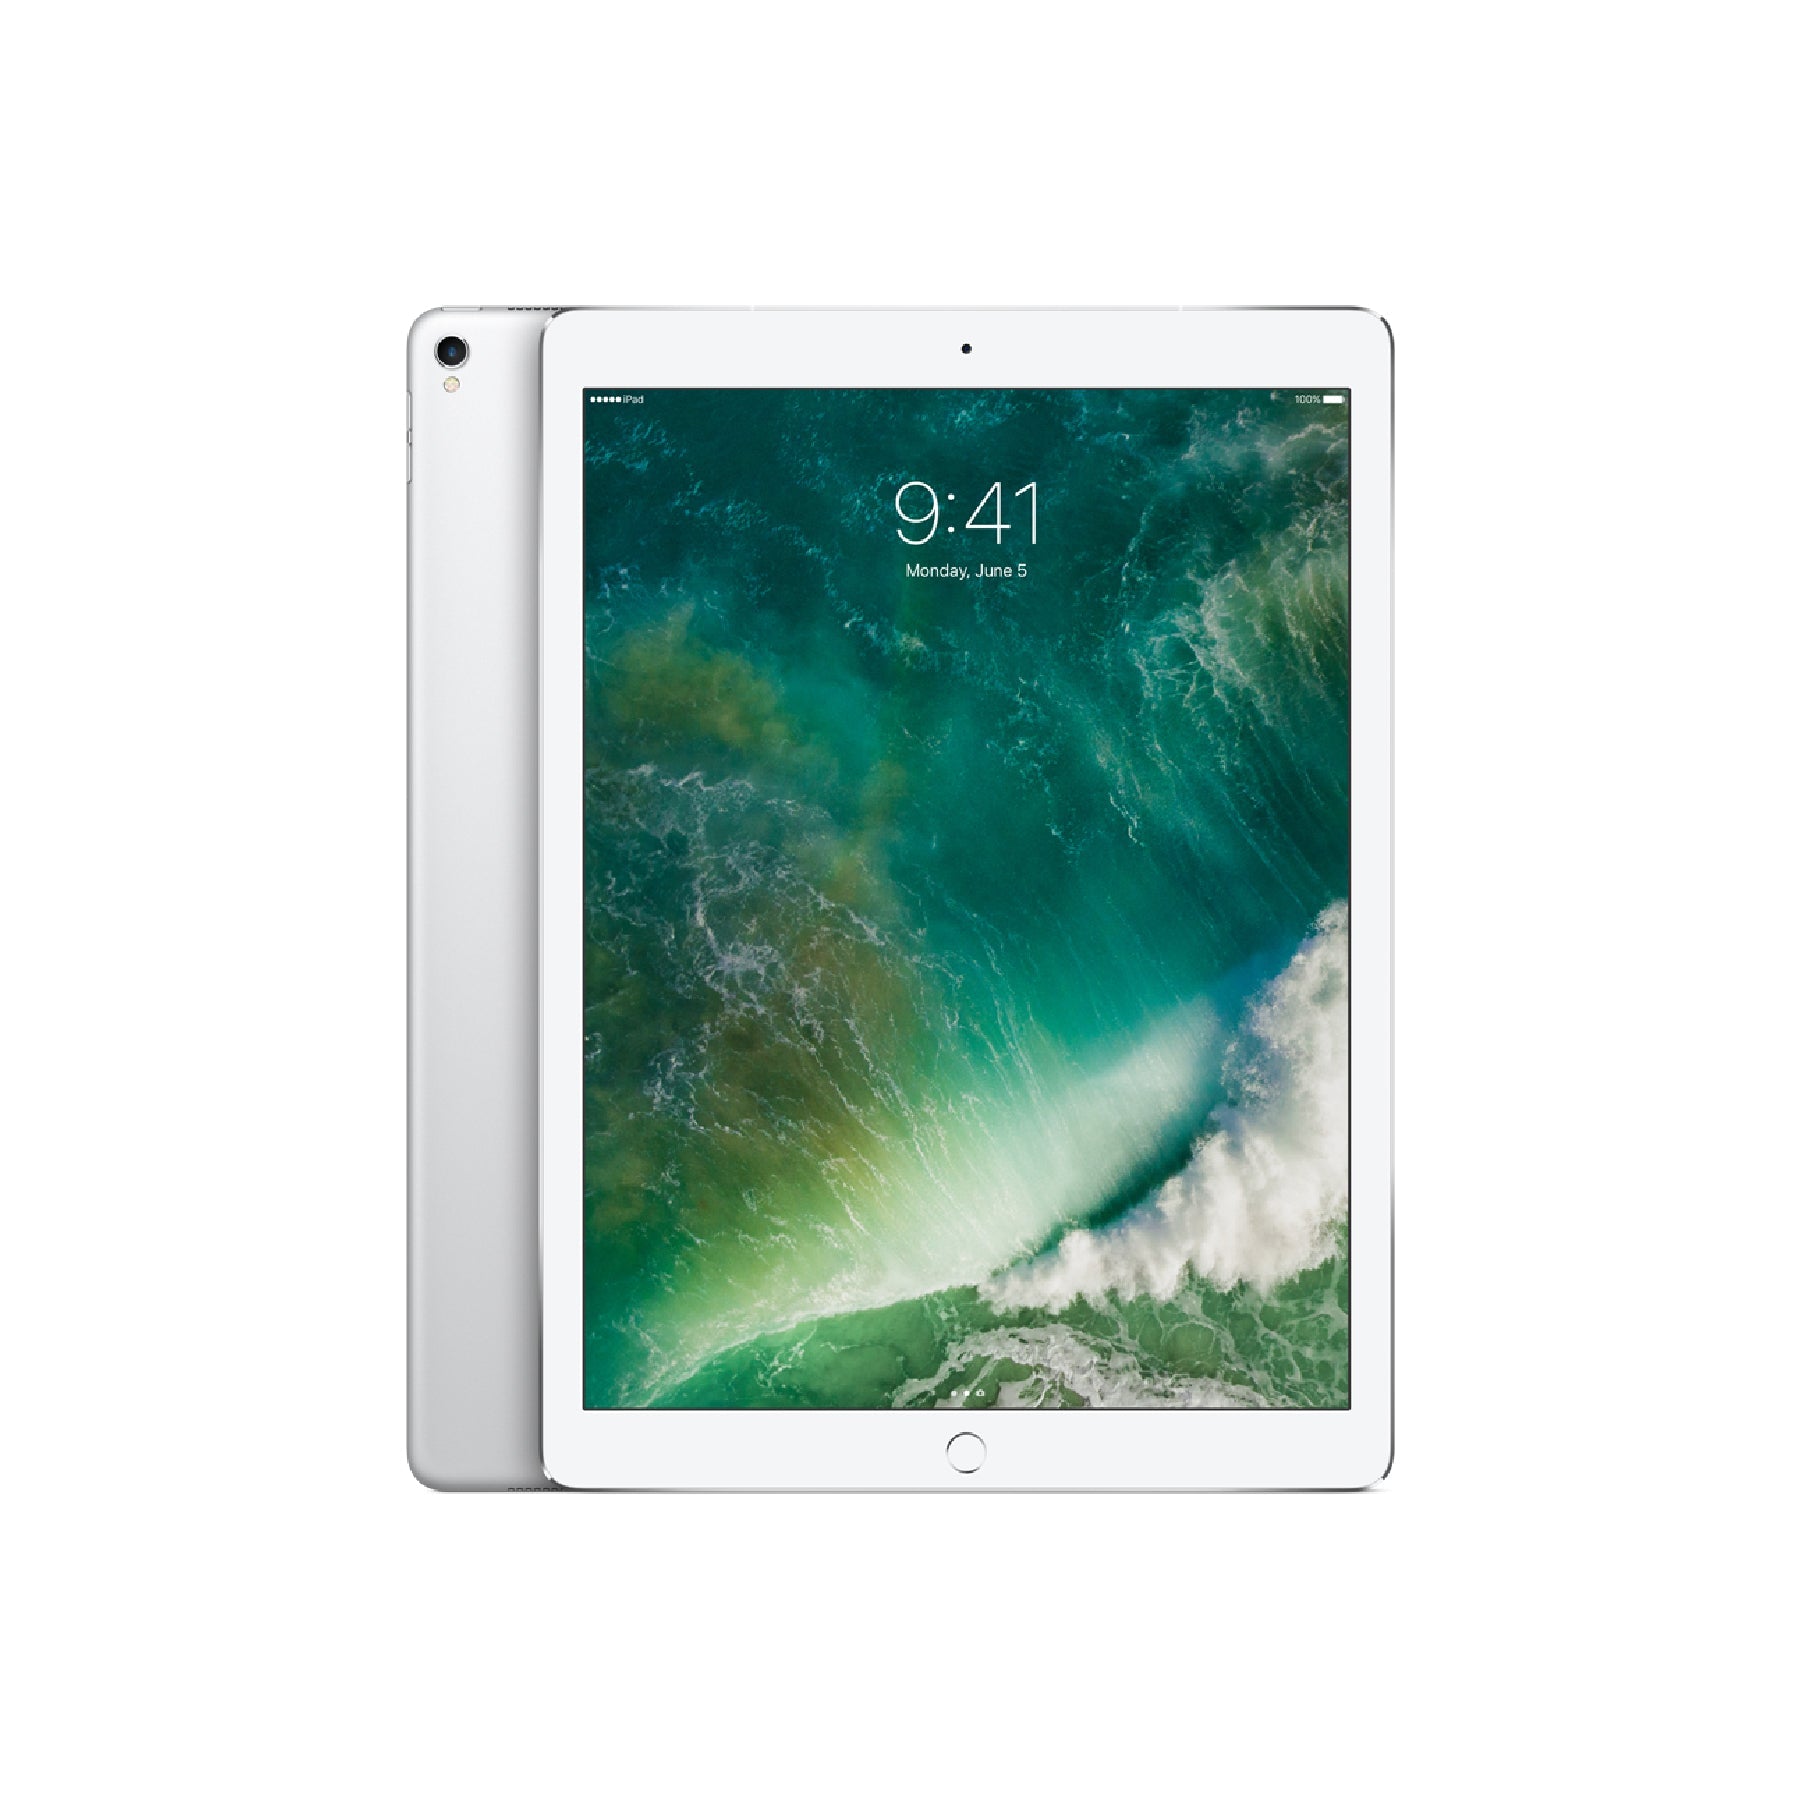 iPad Pro (10.5-inch, 2017) Wi-Fi + Cellular - iStore Pre-owned